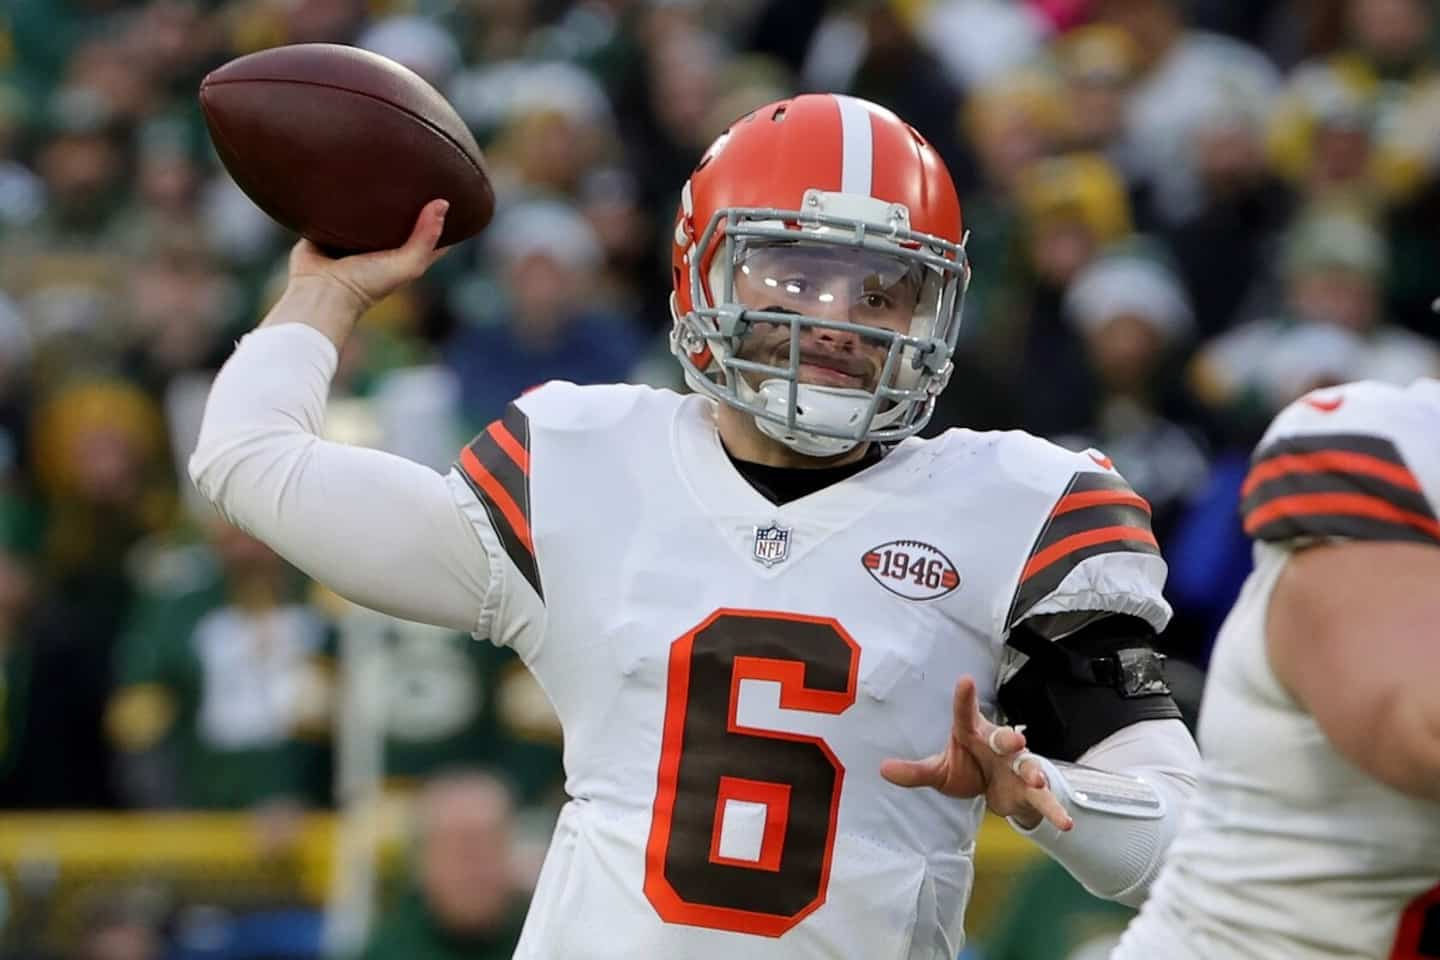 NFL: Baker Mayfield now knows where he will play